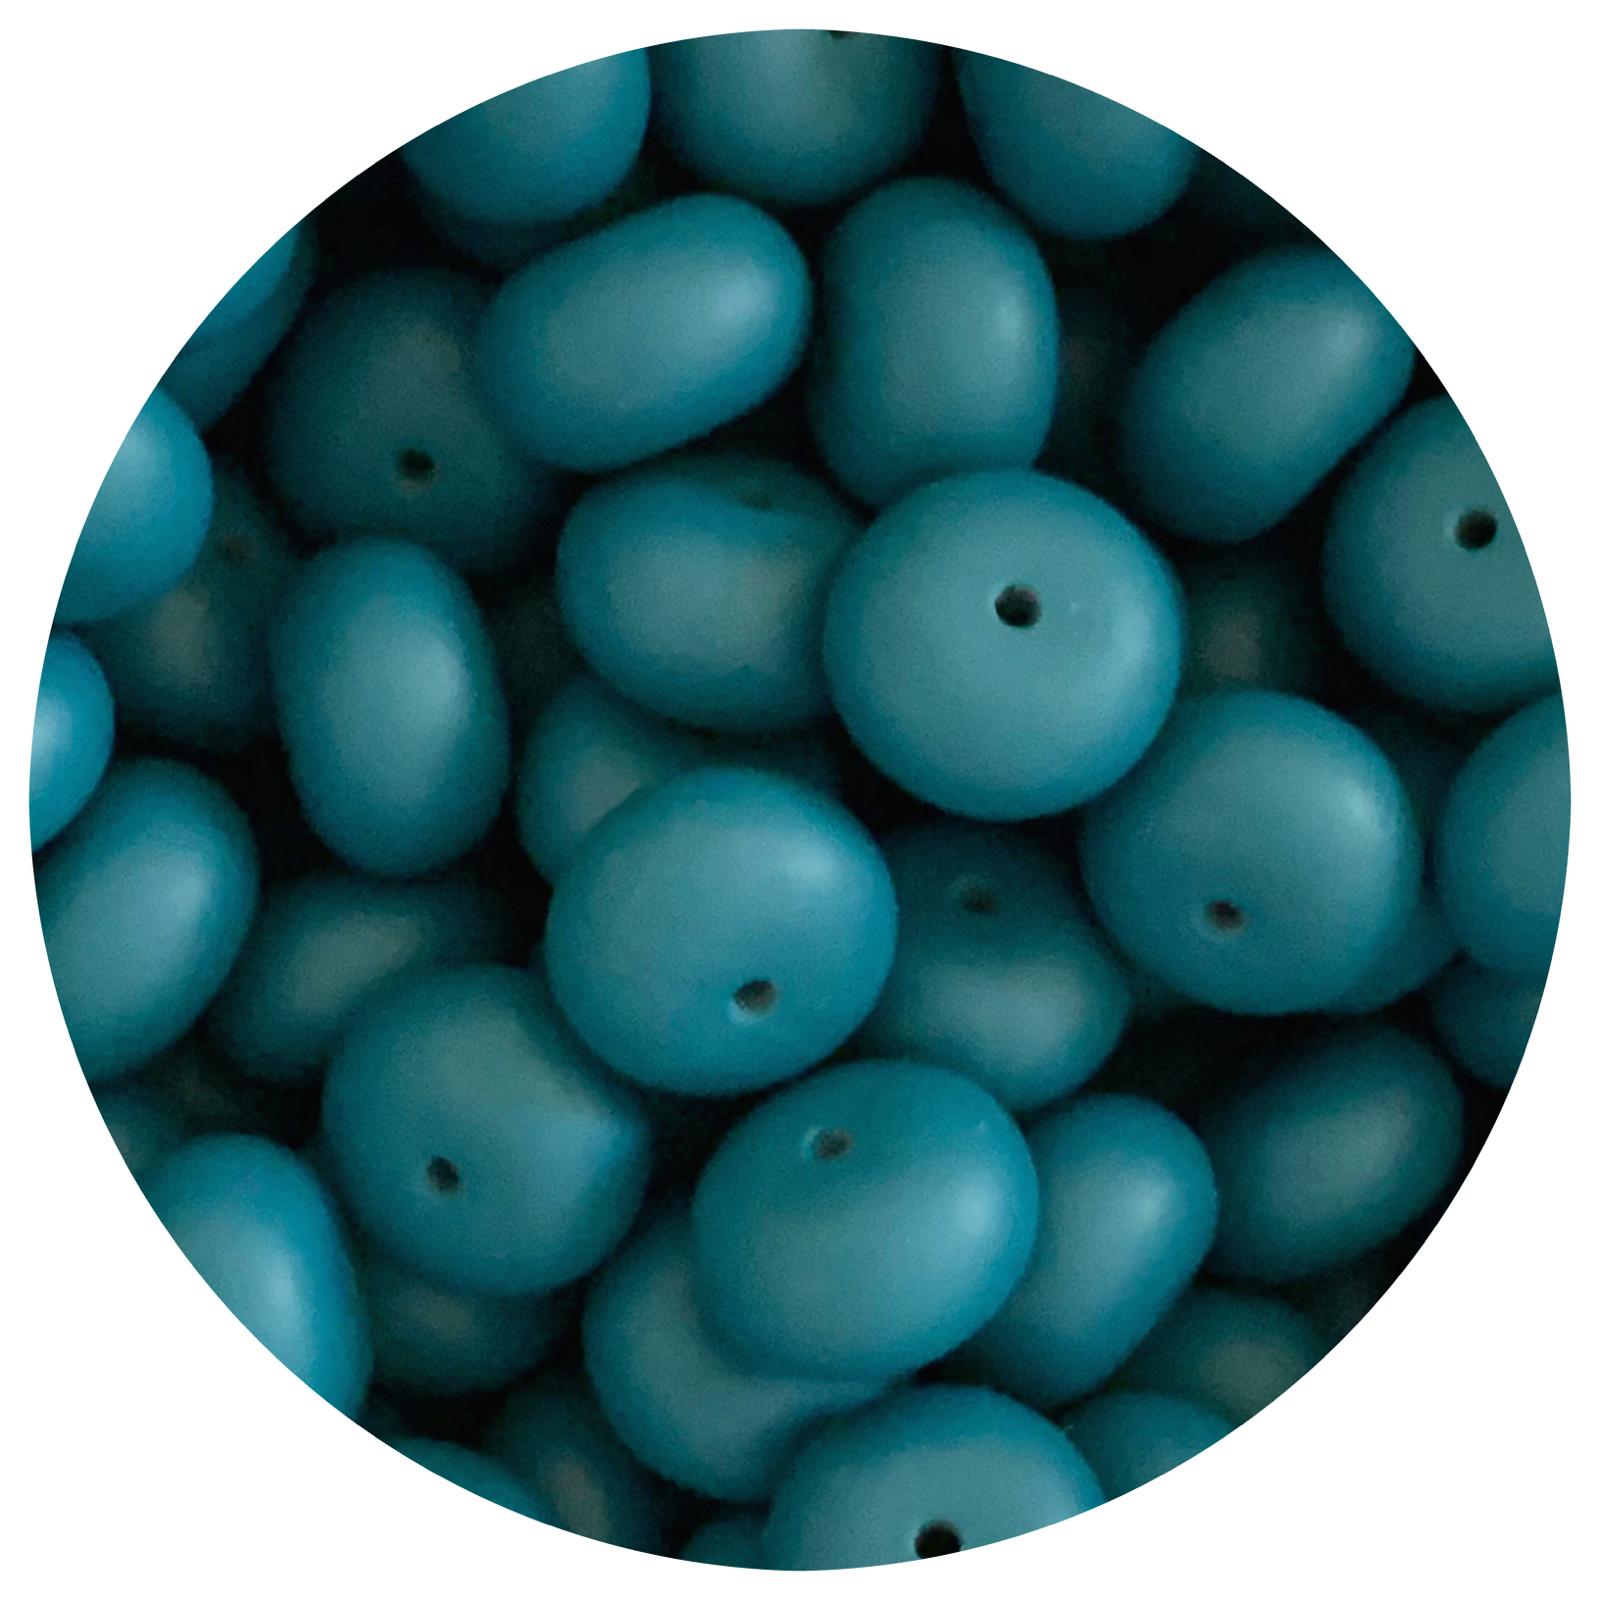 Deep Teal - 22mm Abacus Silicone Beads - 5 Beads